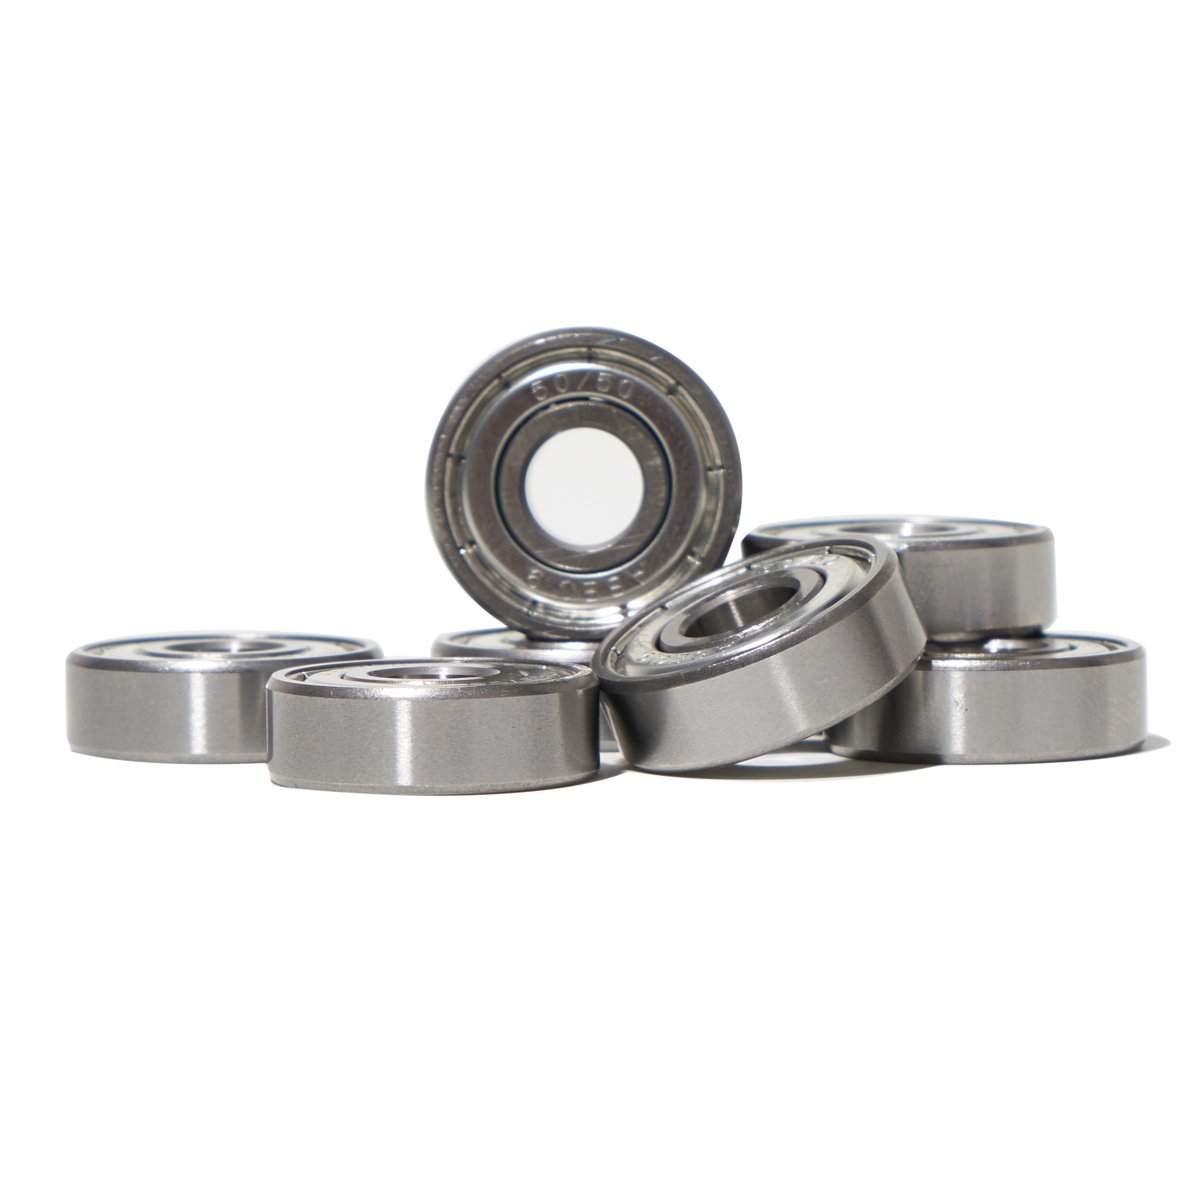 Fifty 50 Abec 9 Bearings (8 Pack)